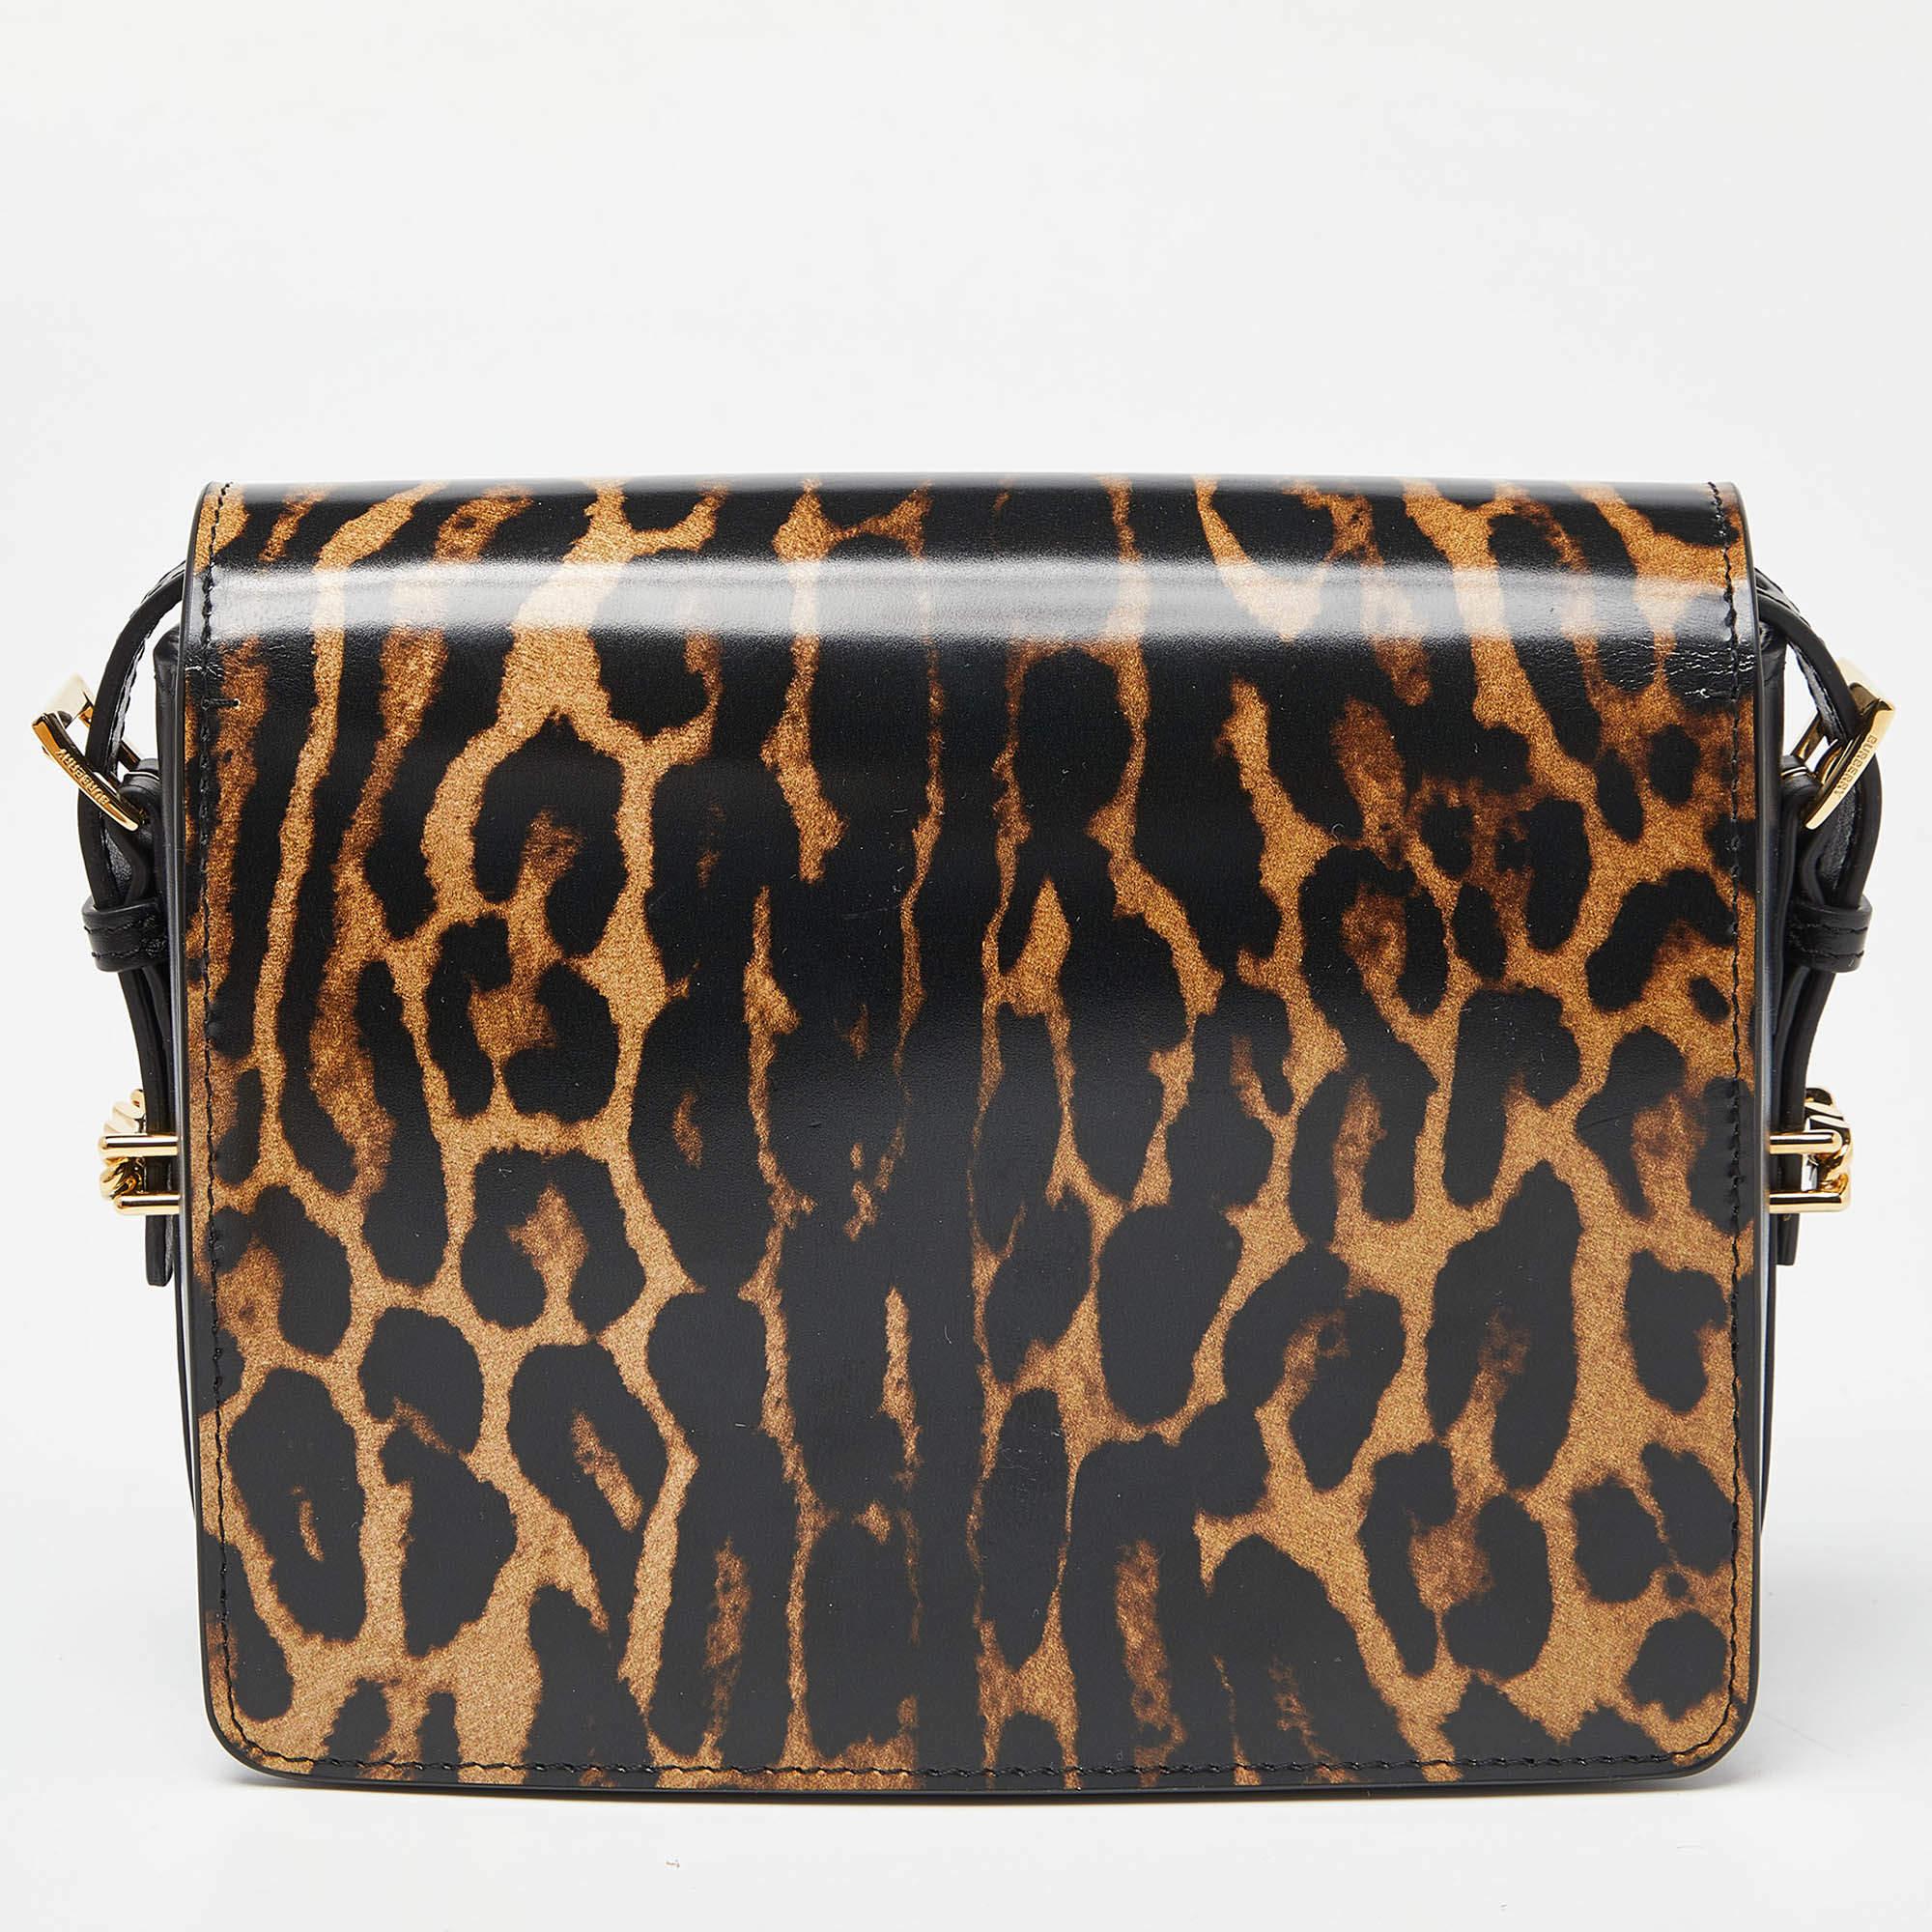 From the house of Burberry comes this gorgeous bag that will be an amazing addition to all your outfits. Luxuriously crafted from leopard-printed leather and styled with a flap closure that opens to a well-sized leather interior, the Grace bag